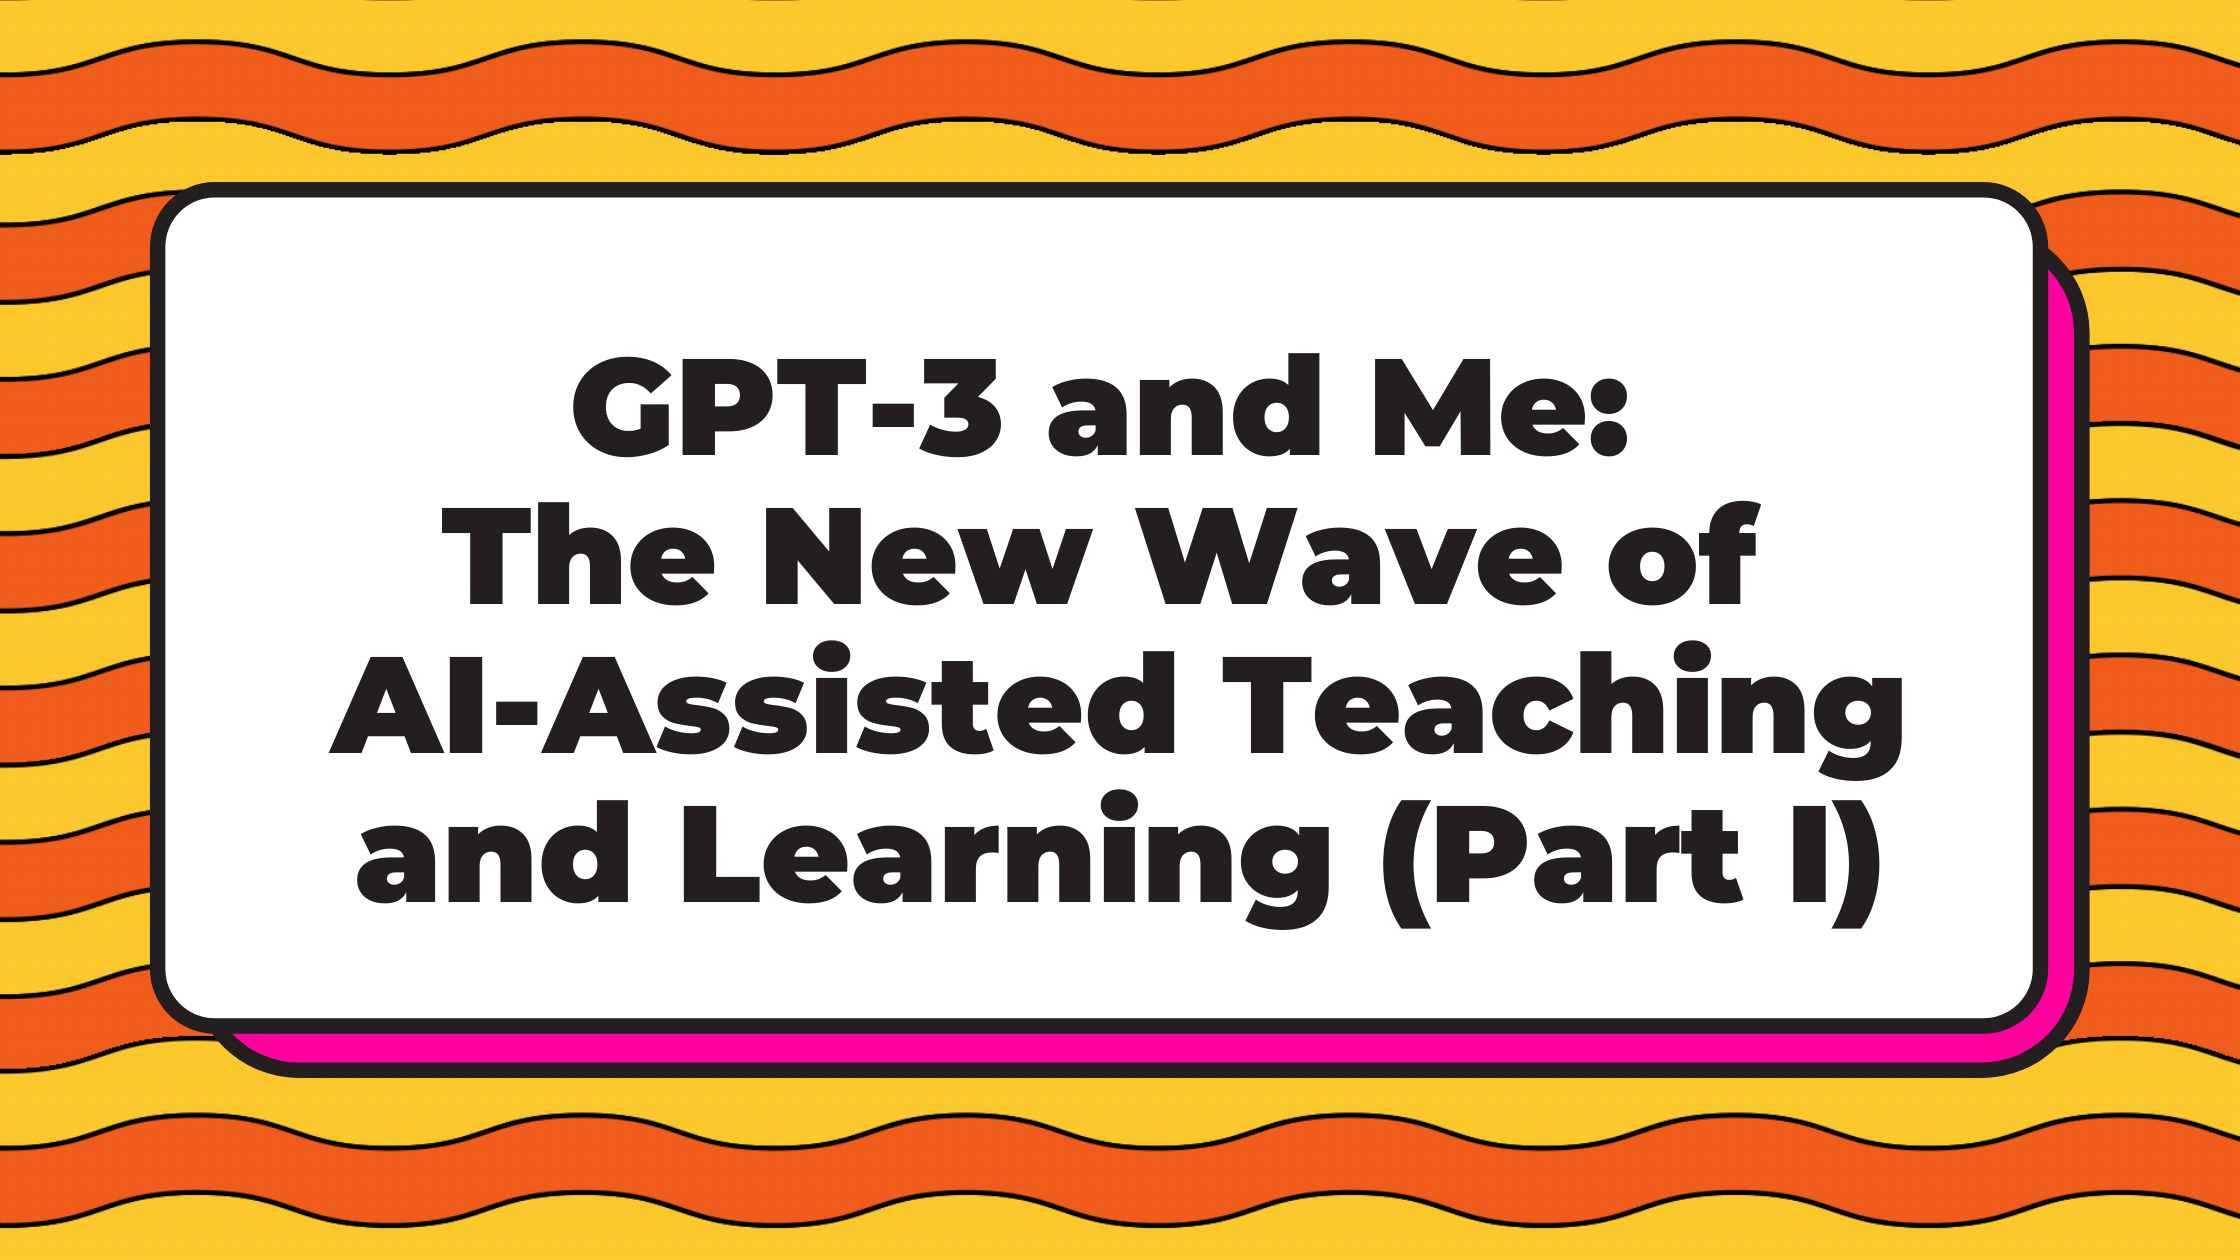 gpt3-new-wave-ai-assisted-teaching-learning-part-one